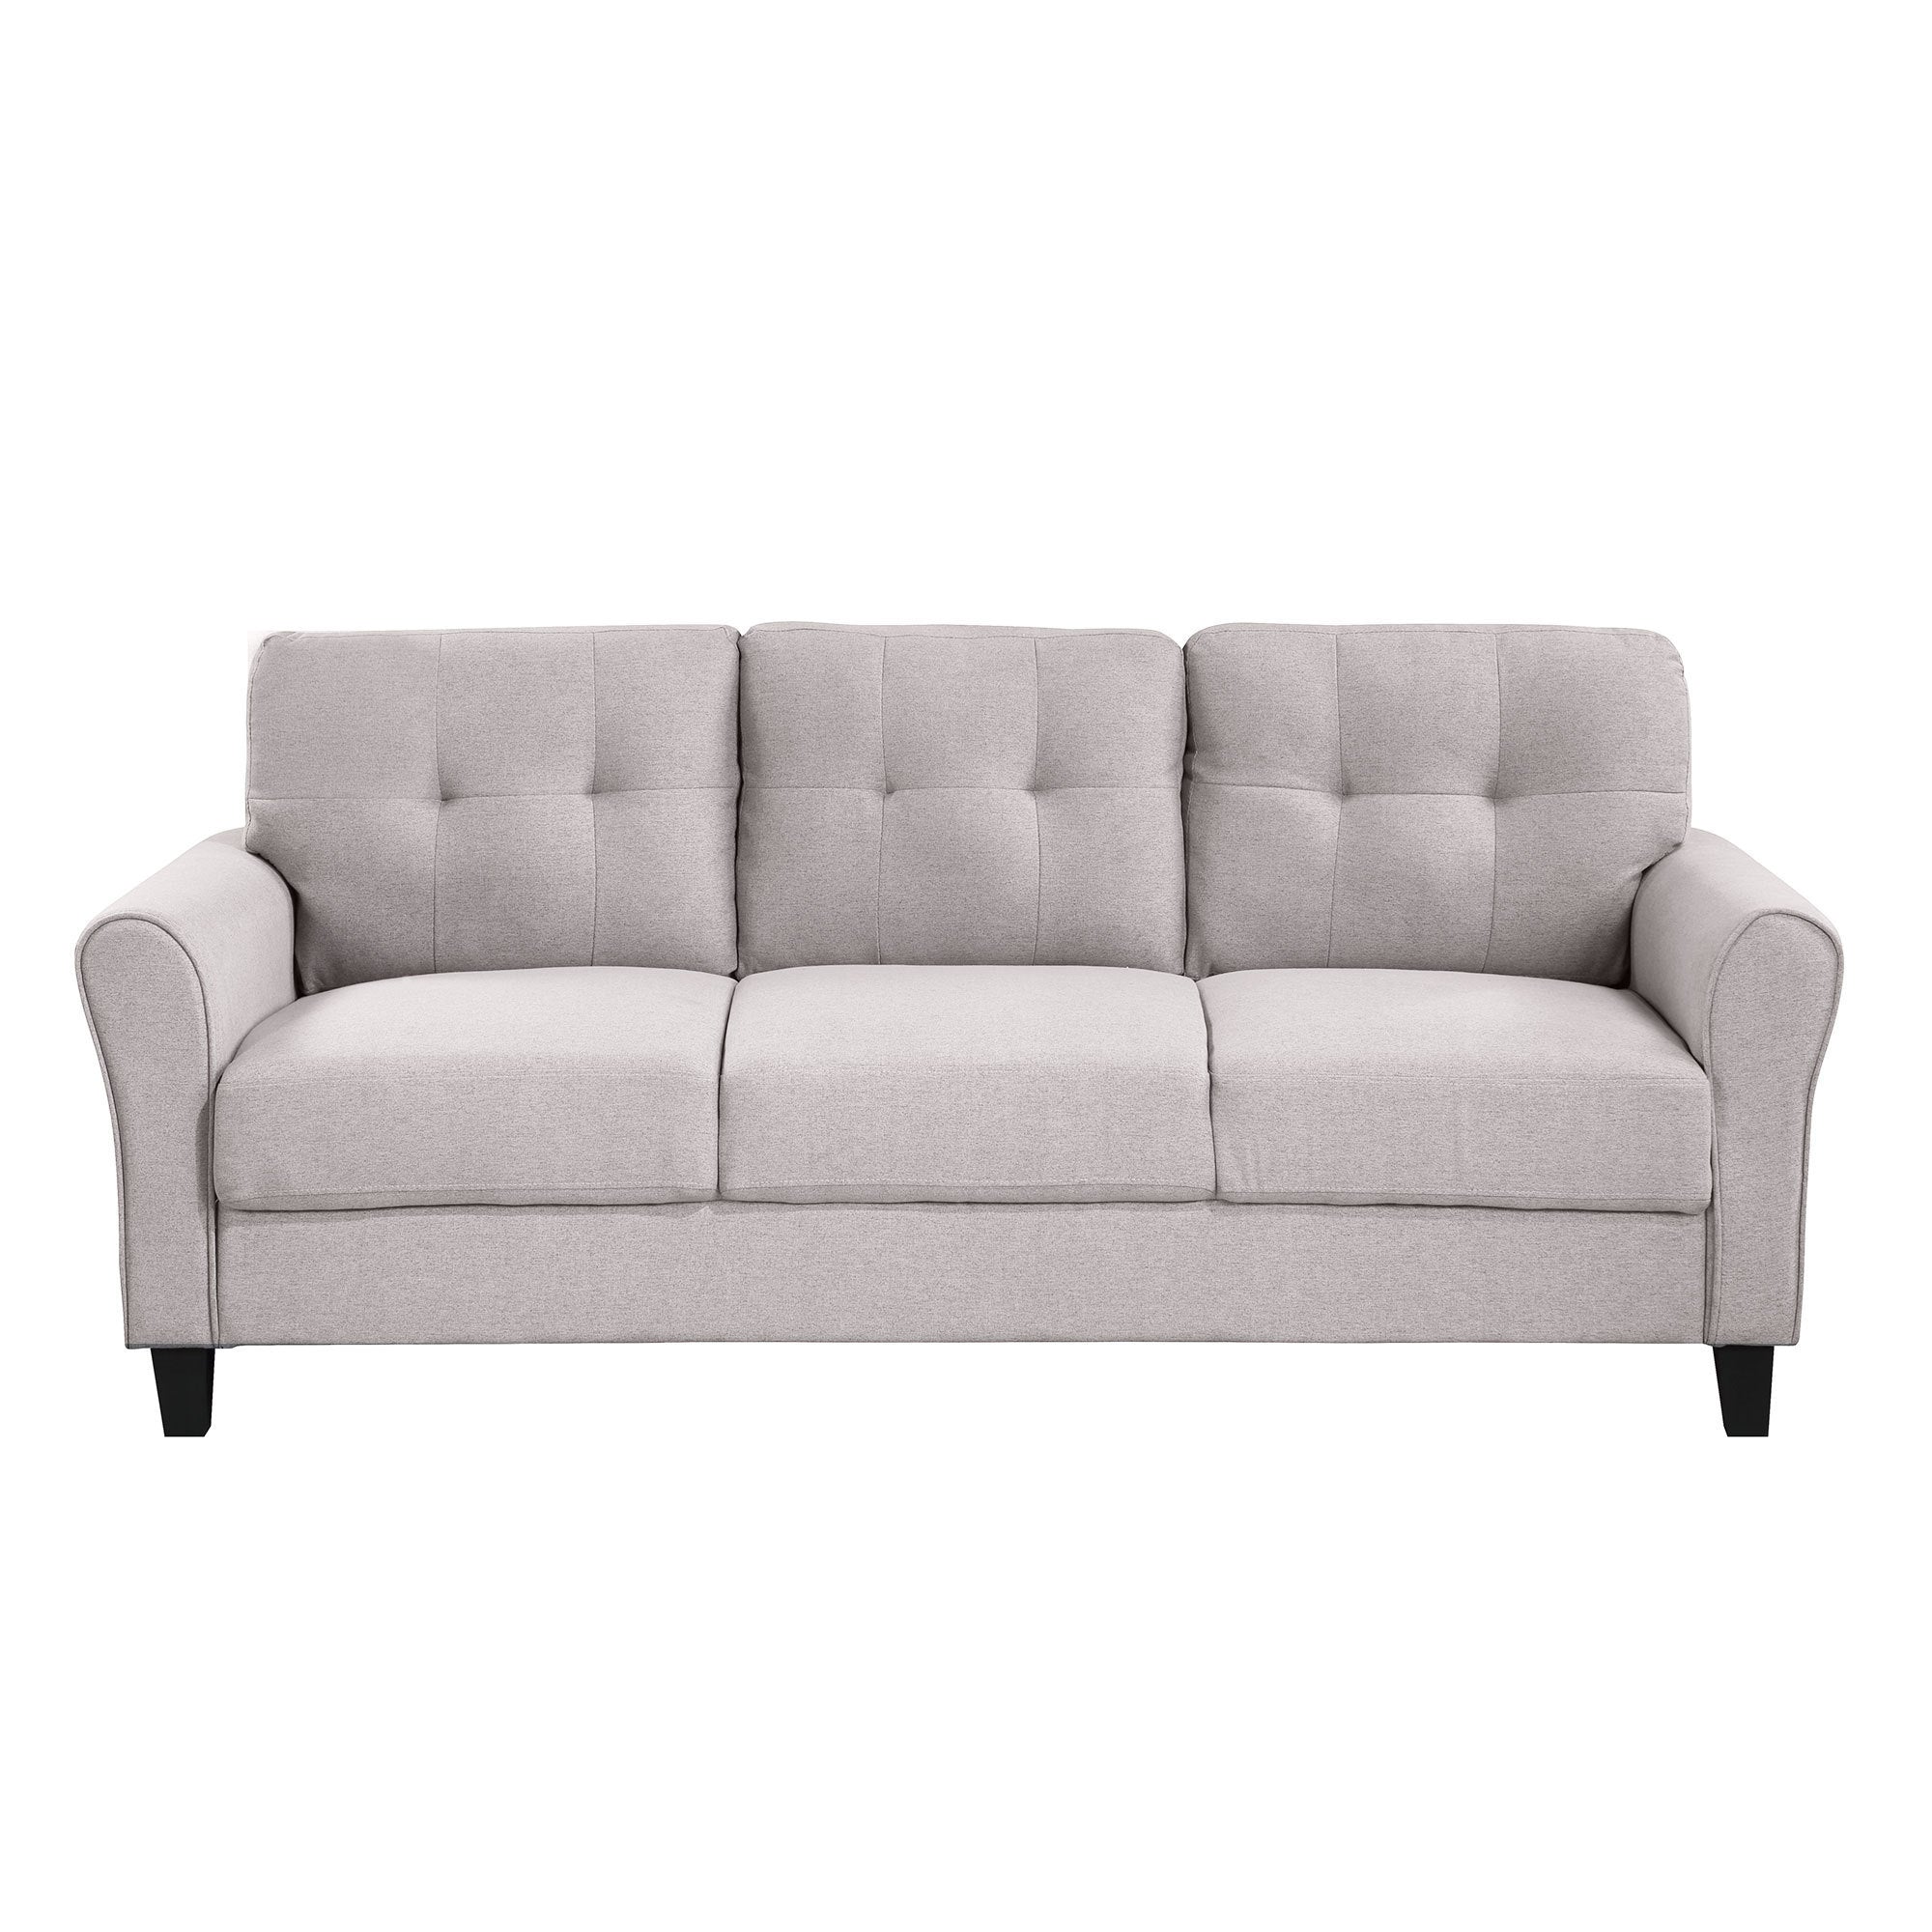 Upholstered Couch Furniture for Home or Office - Light Grey